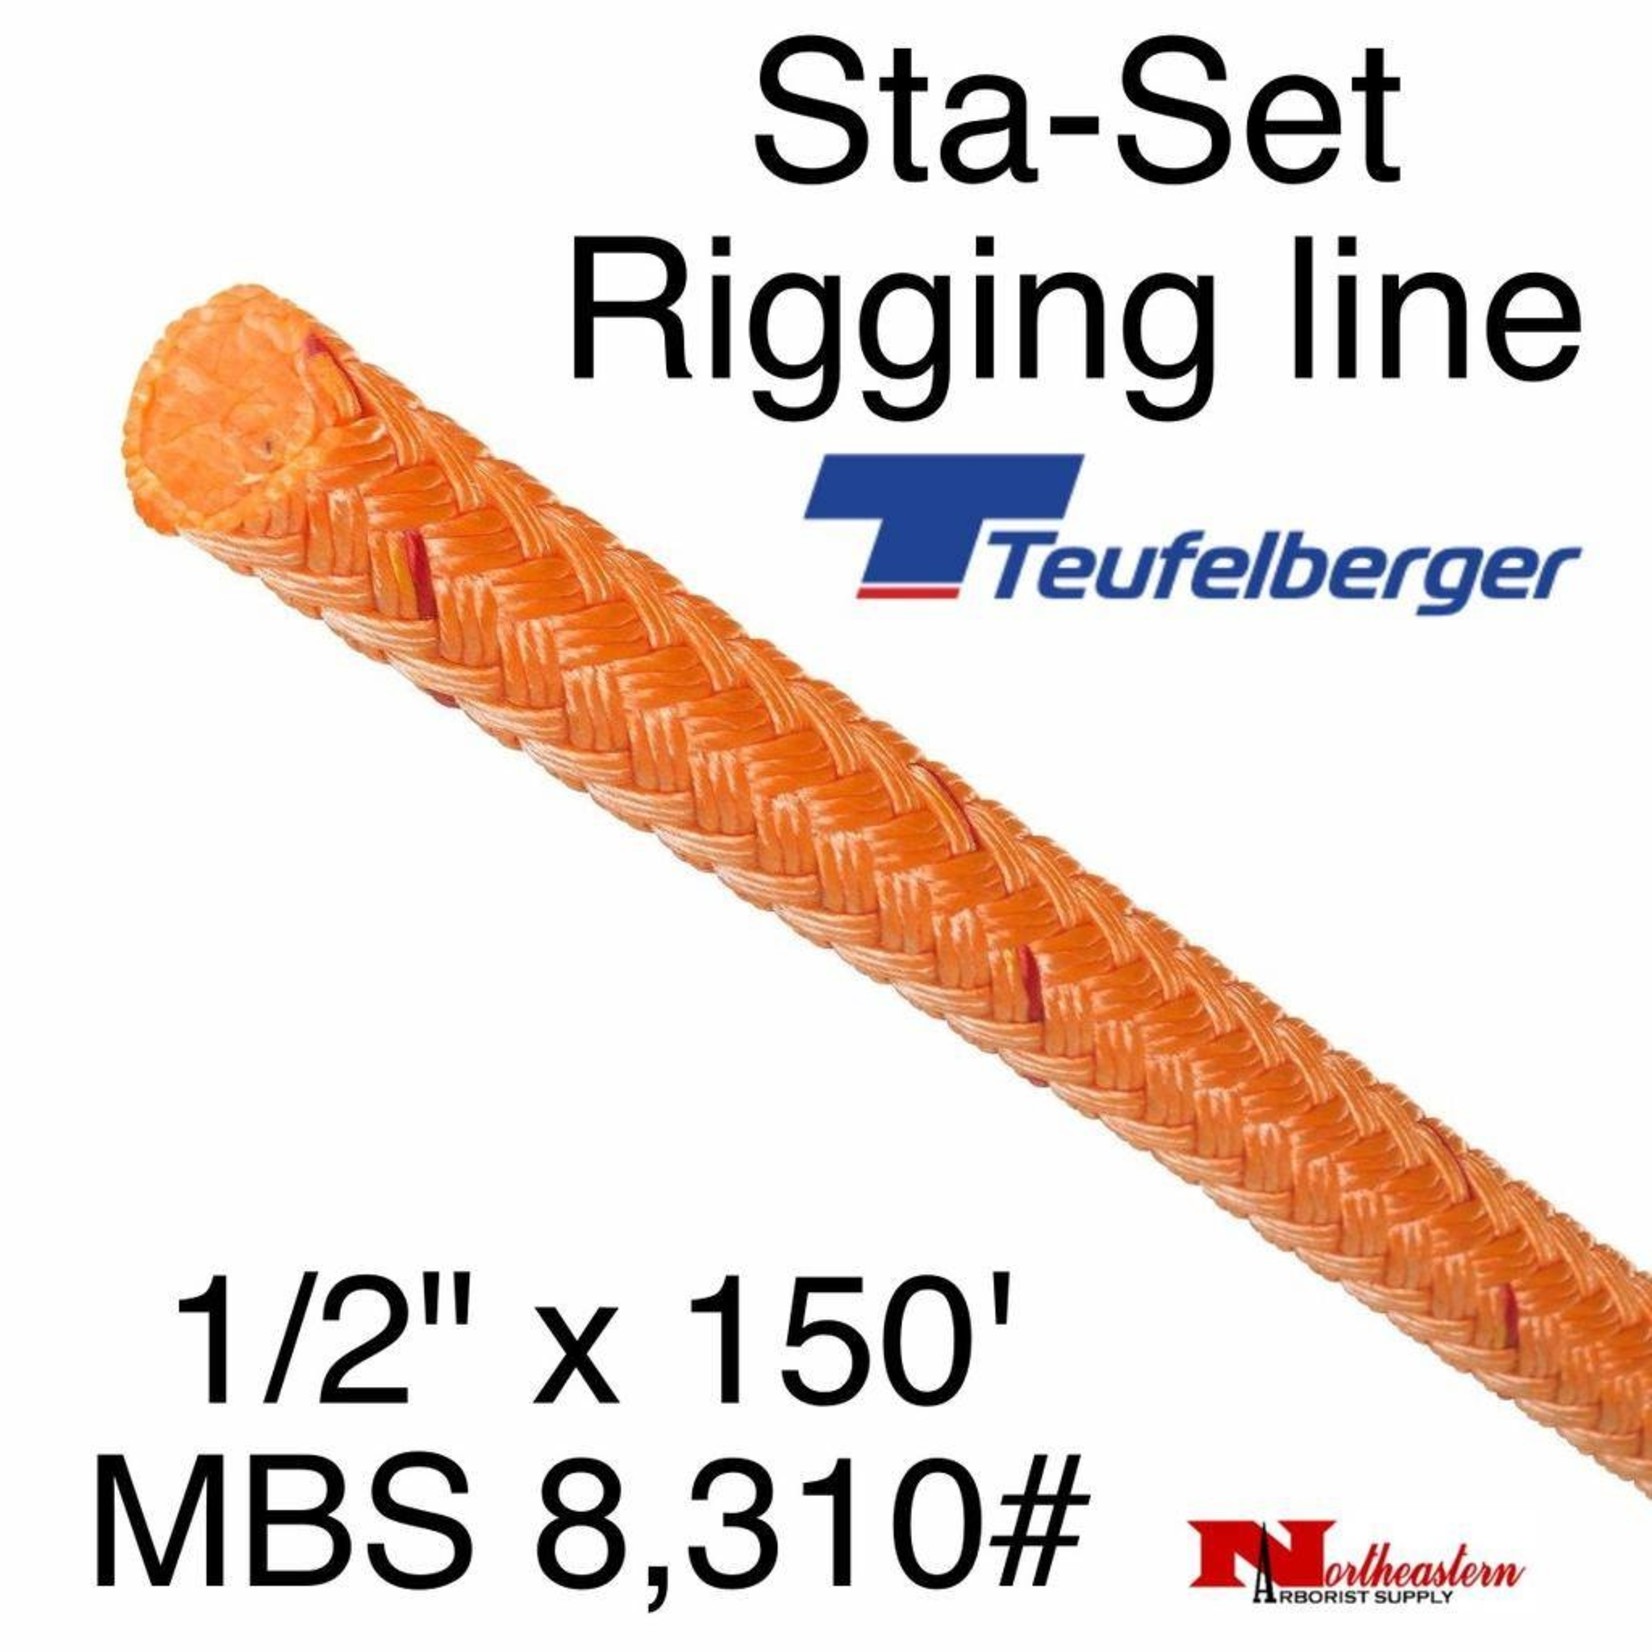 Teufelberger Sta-Set 1/2" x 150' Coated Red 8,310#MBS